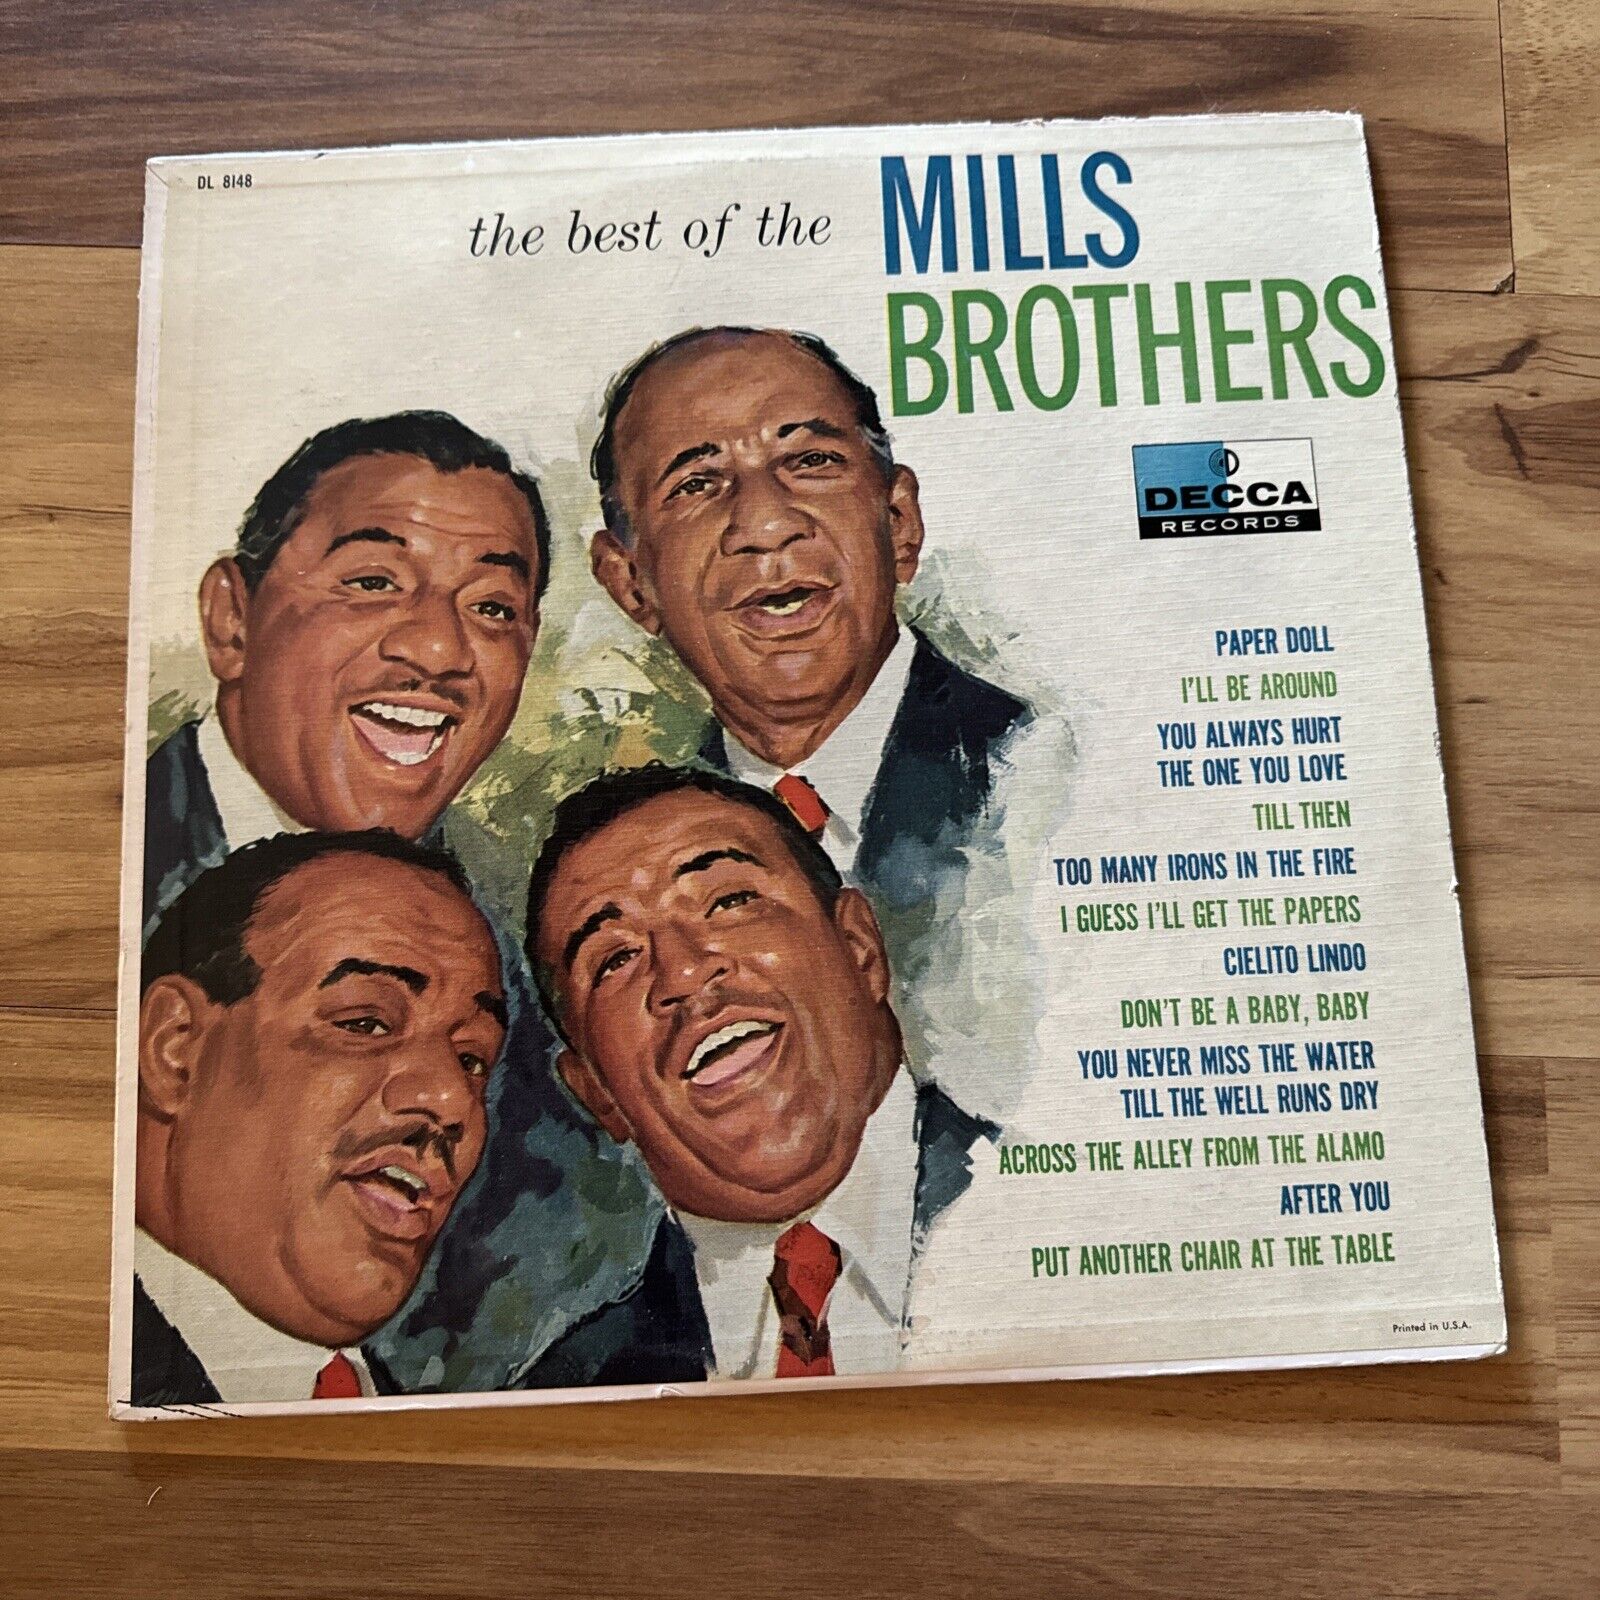 The Mills Brothers The Best Of The Mills Brothers LP Vinyl Record Album